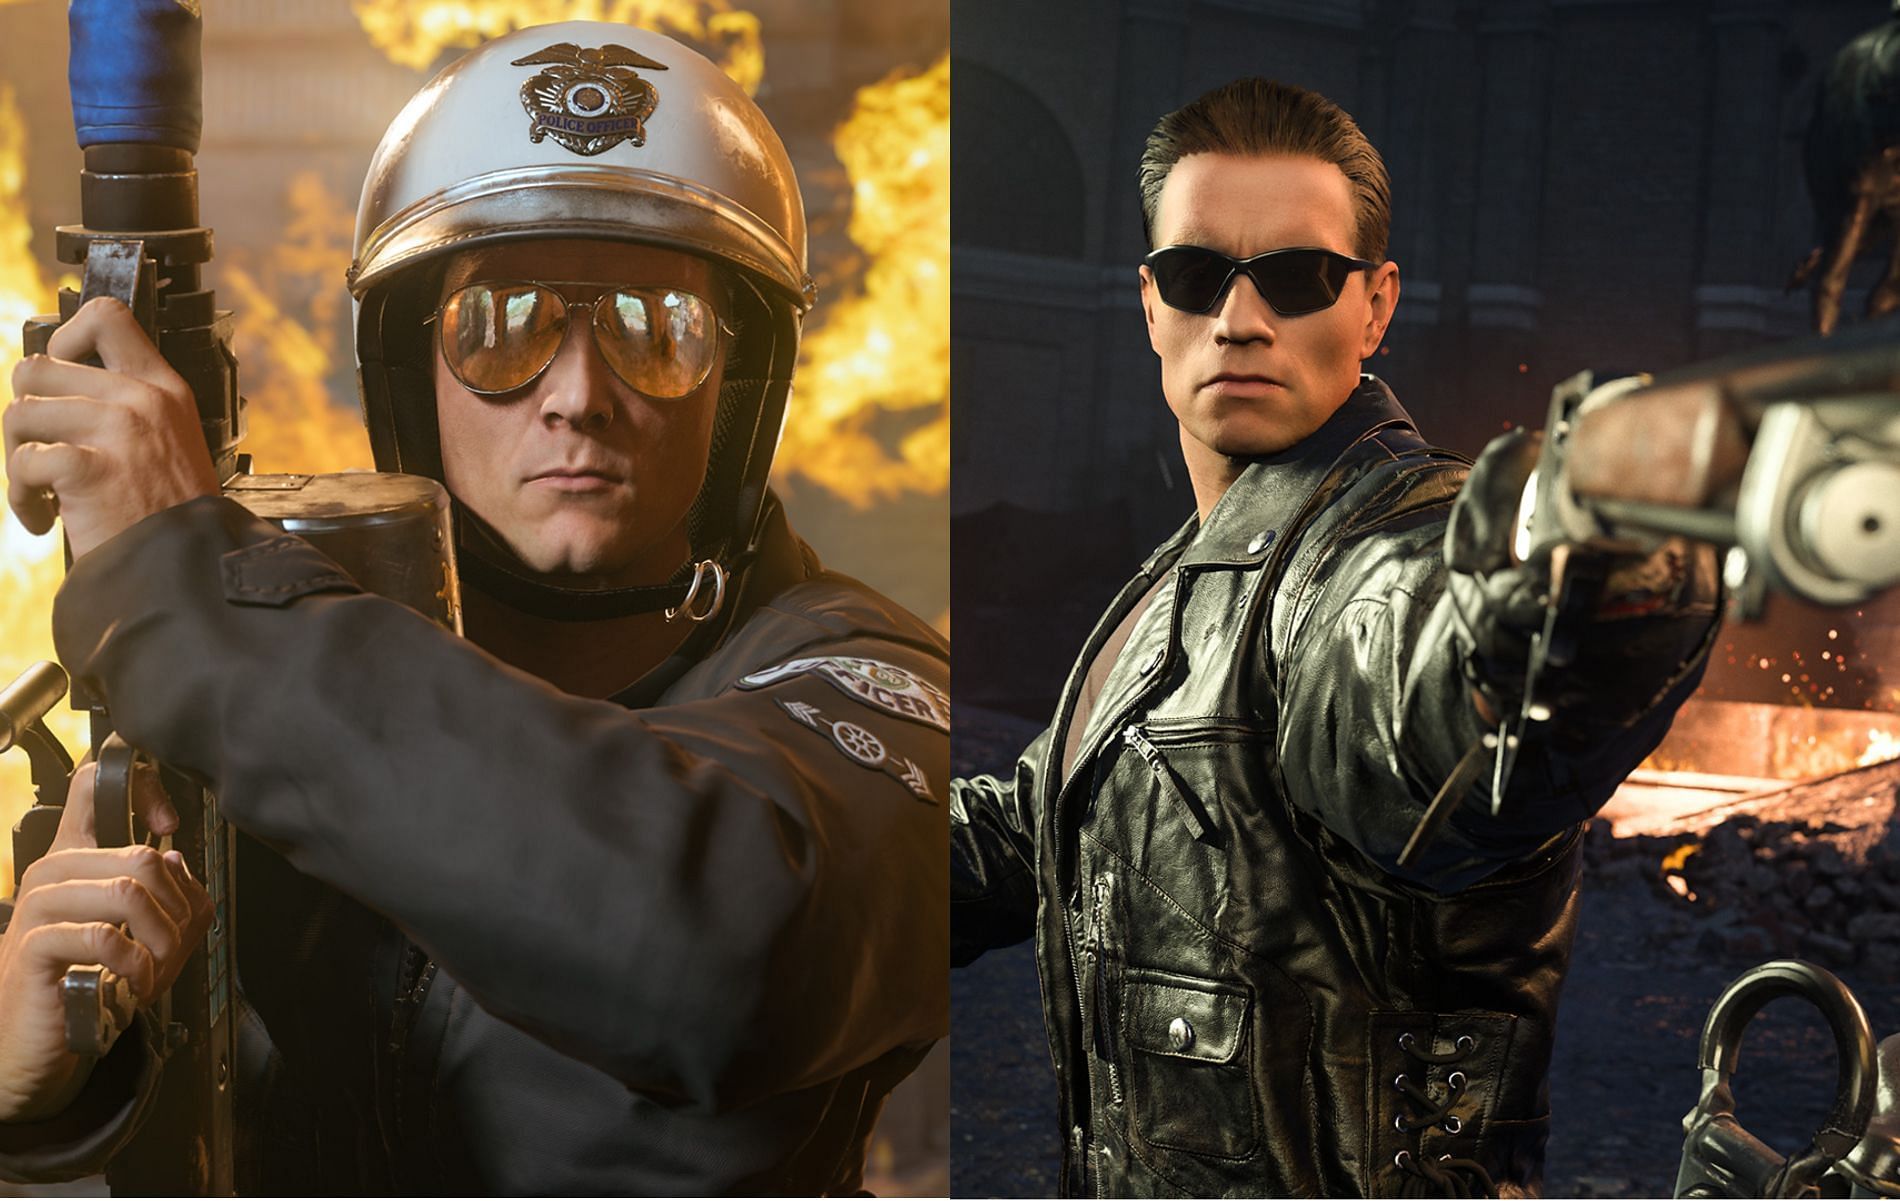 Call of Duty x Terminator crossover bundle arriving in Warzone and Vanguard soon (Images via Activision)